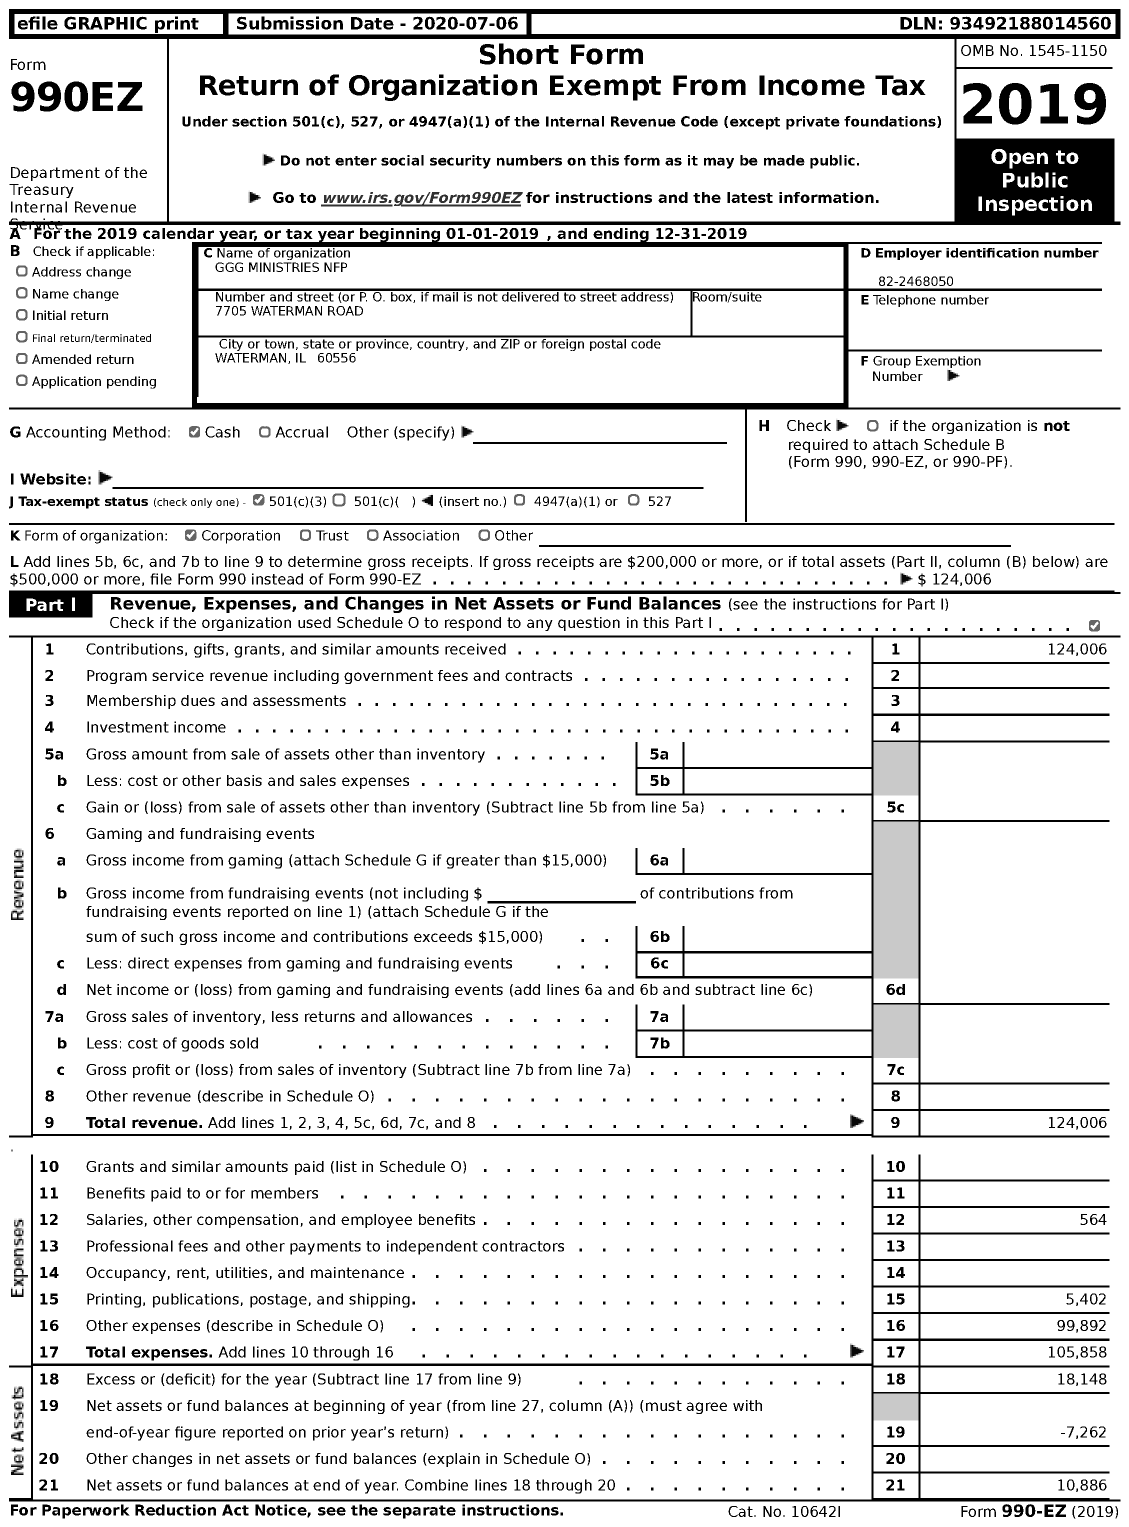 Image of first page of 2019 Form 990EZ for GGG Ministries NFP